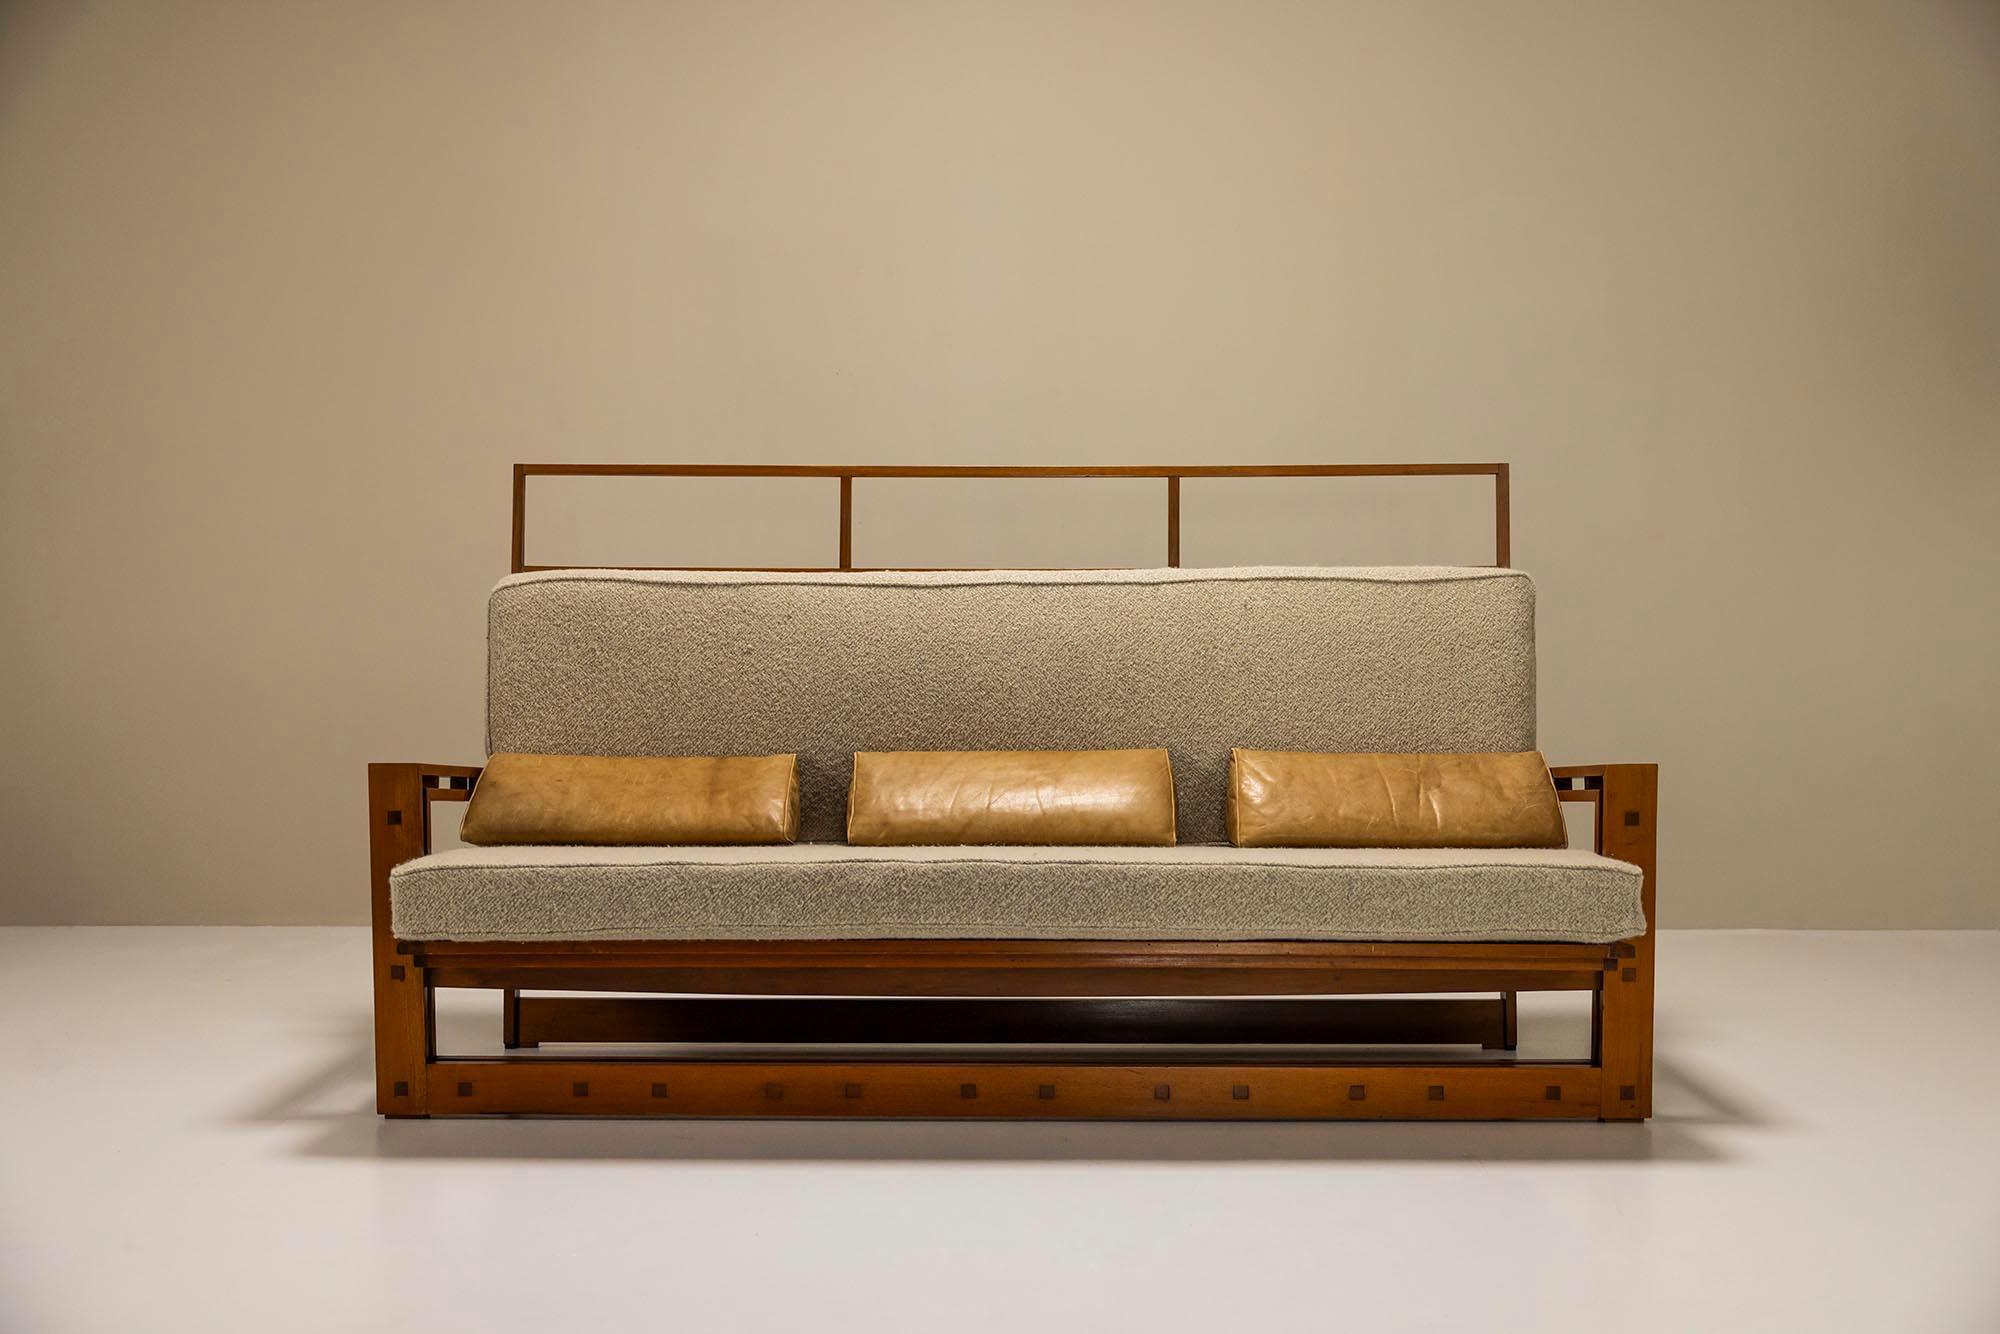 This unique sofa was designed by the Italian architect Fausto Bontempi, who mainly worked in and around Brescia. He Graduated from the Università Iuav di Venezia and later also worked as a professor of architecture. Throughout his career he has been